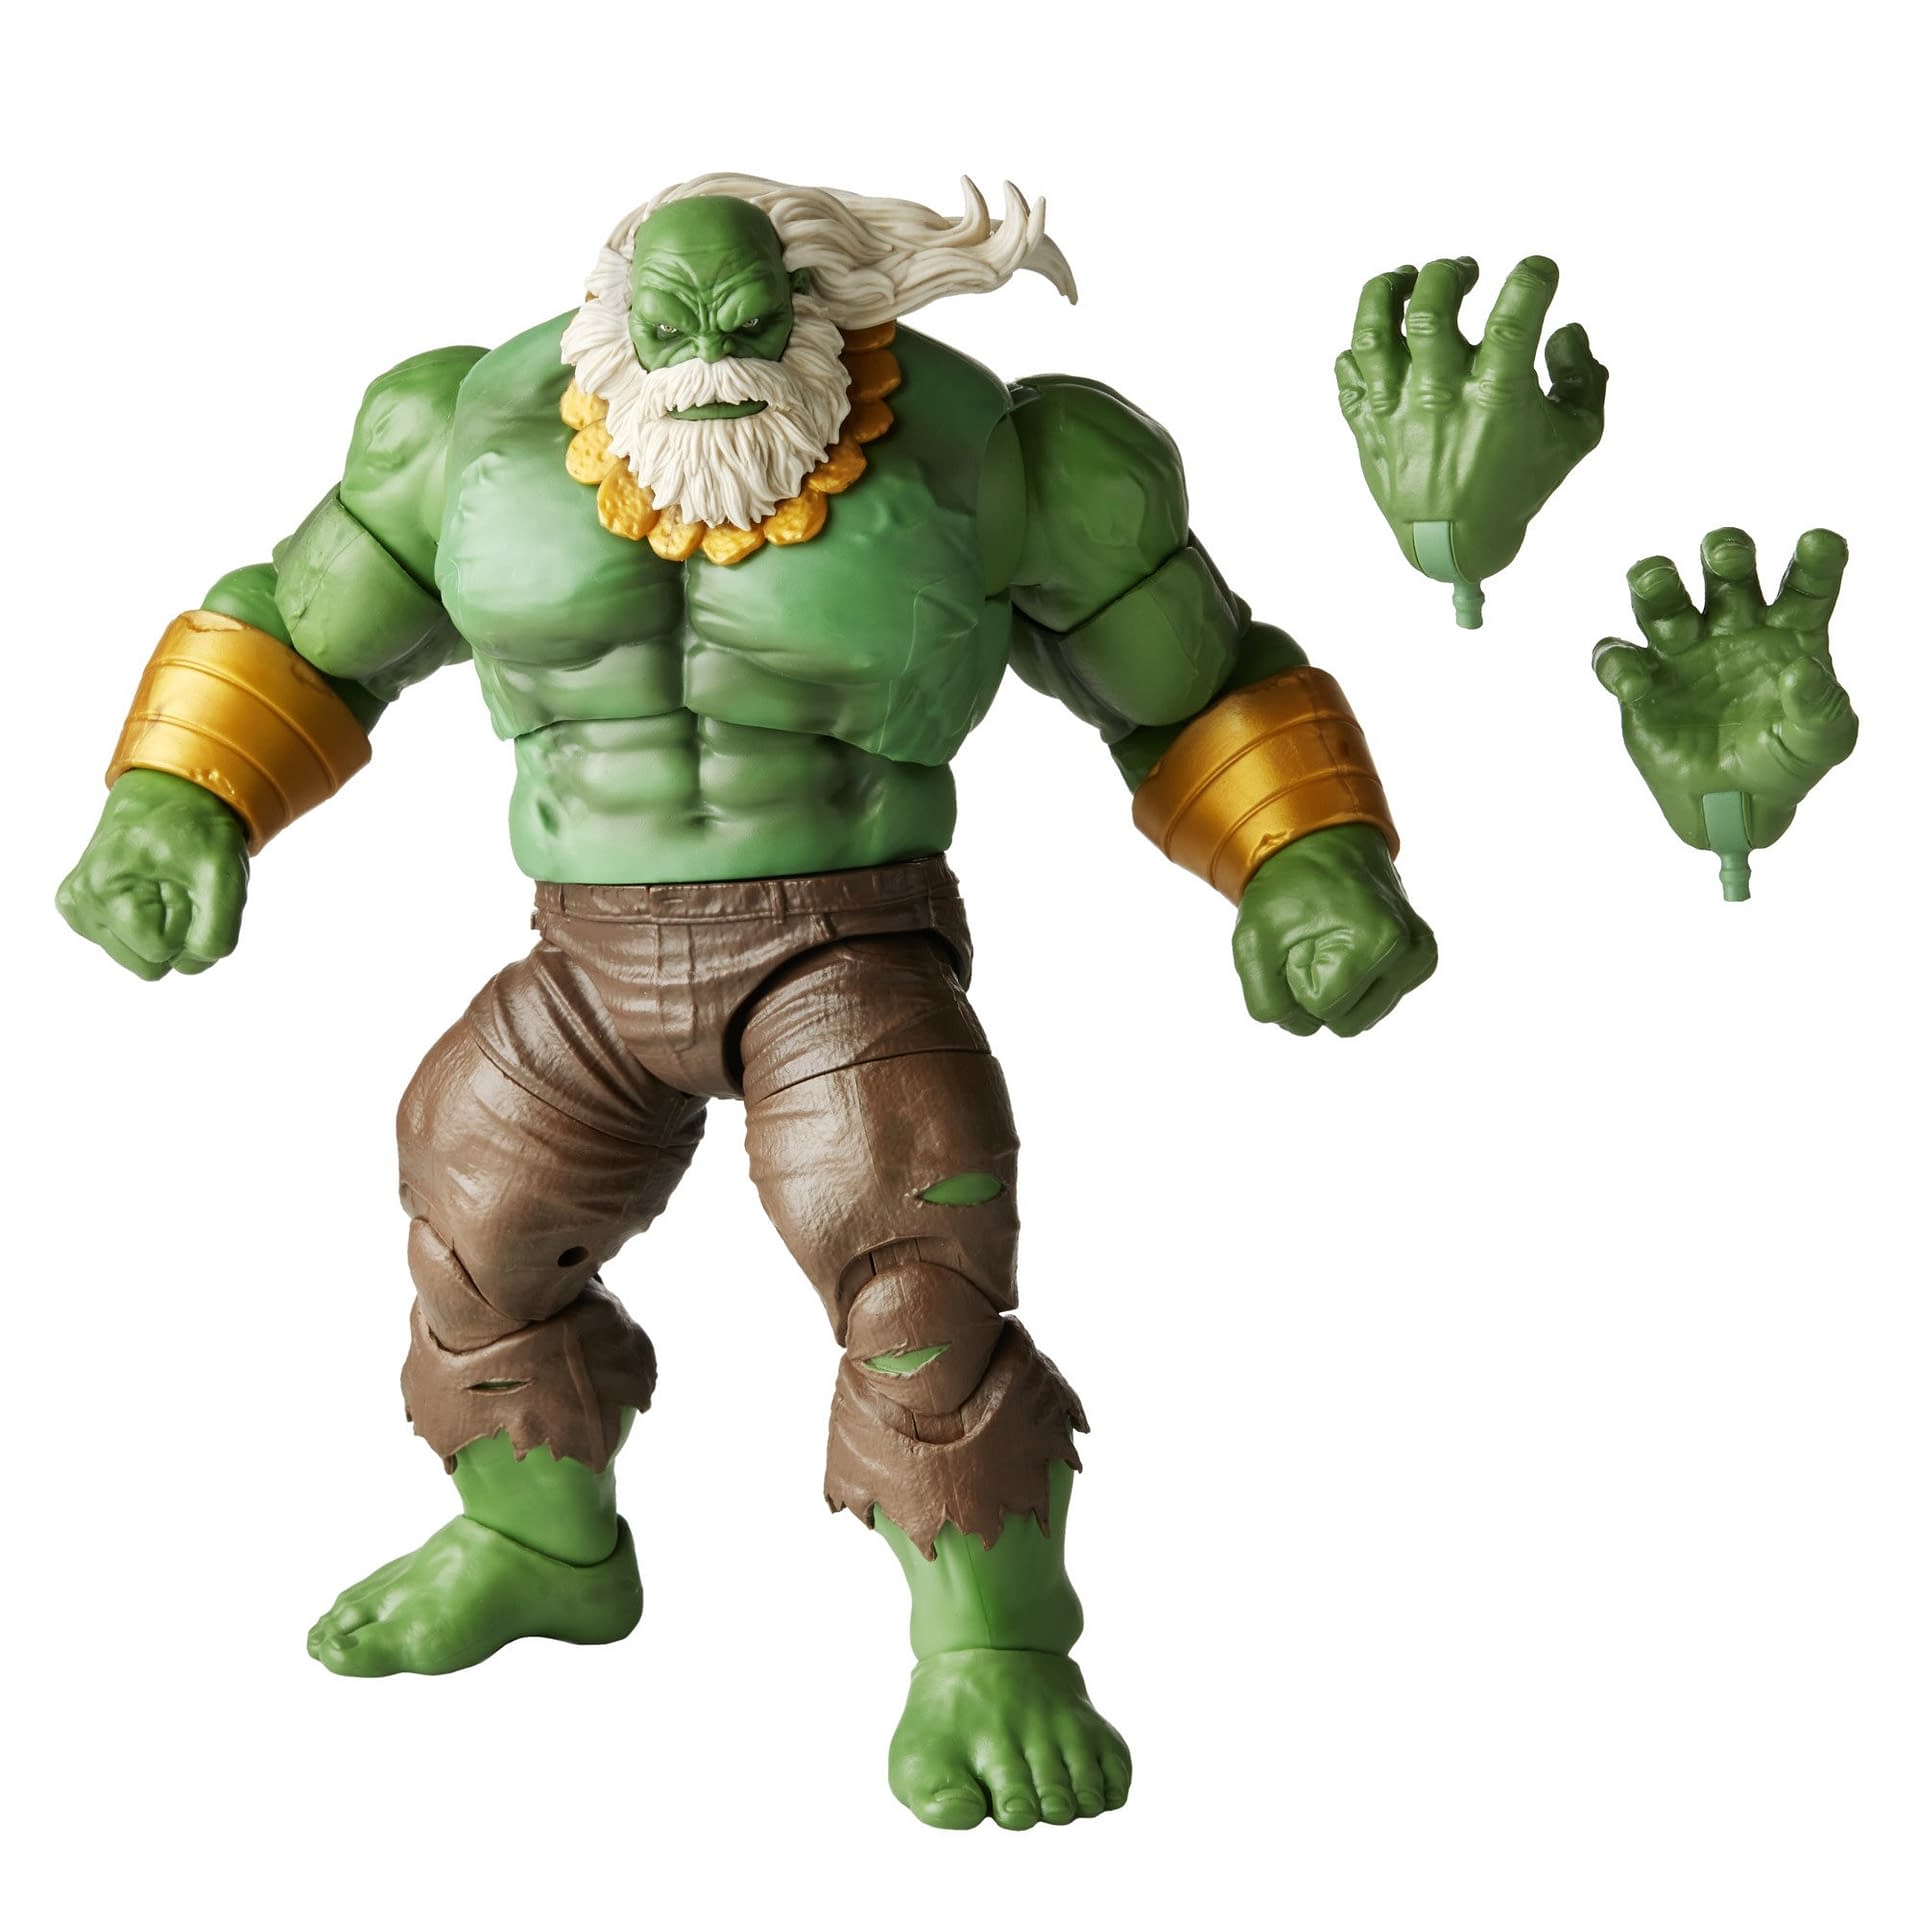 Marvel Legends Maestro Now Available To Order From Hasbro